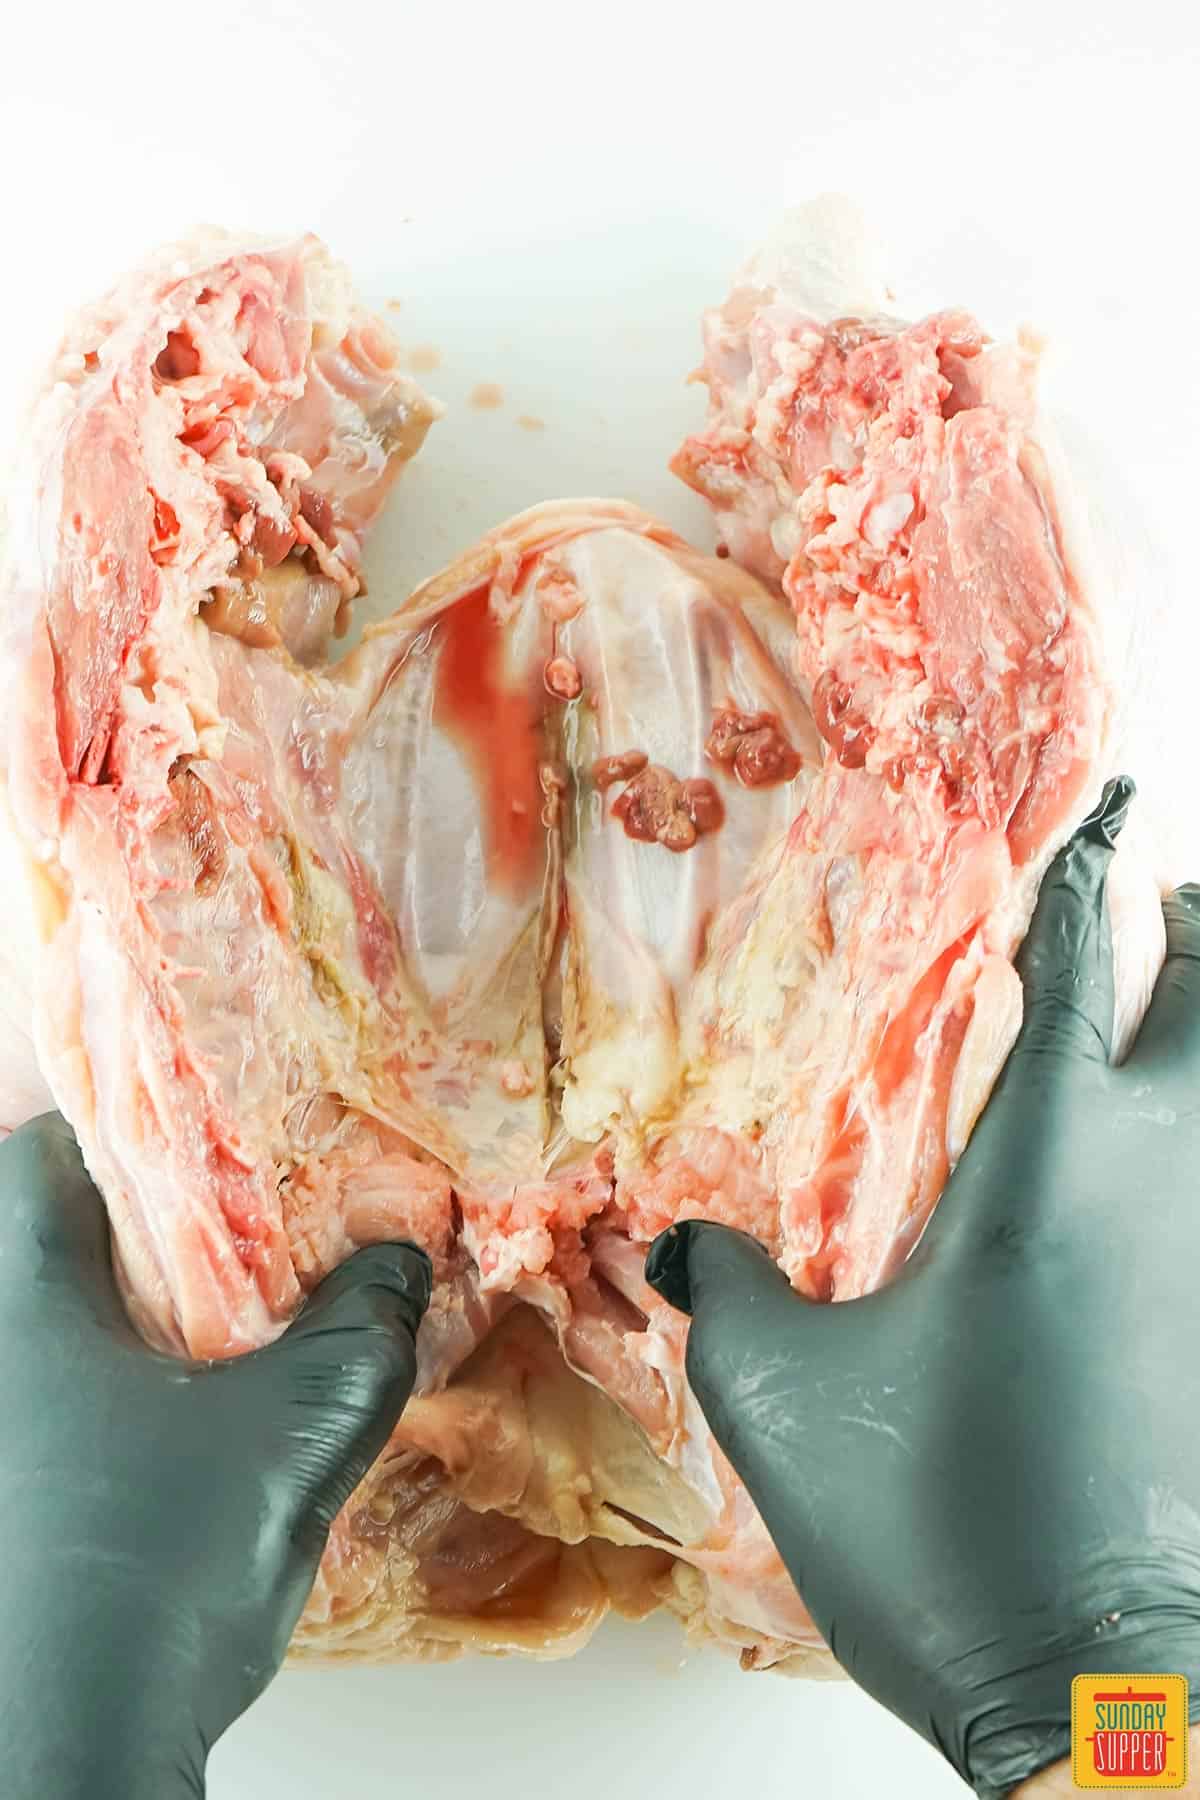 separating the breastbone from the turkey by gently pressing down